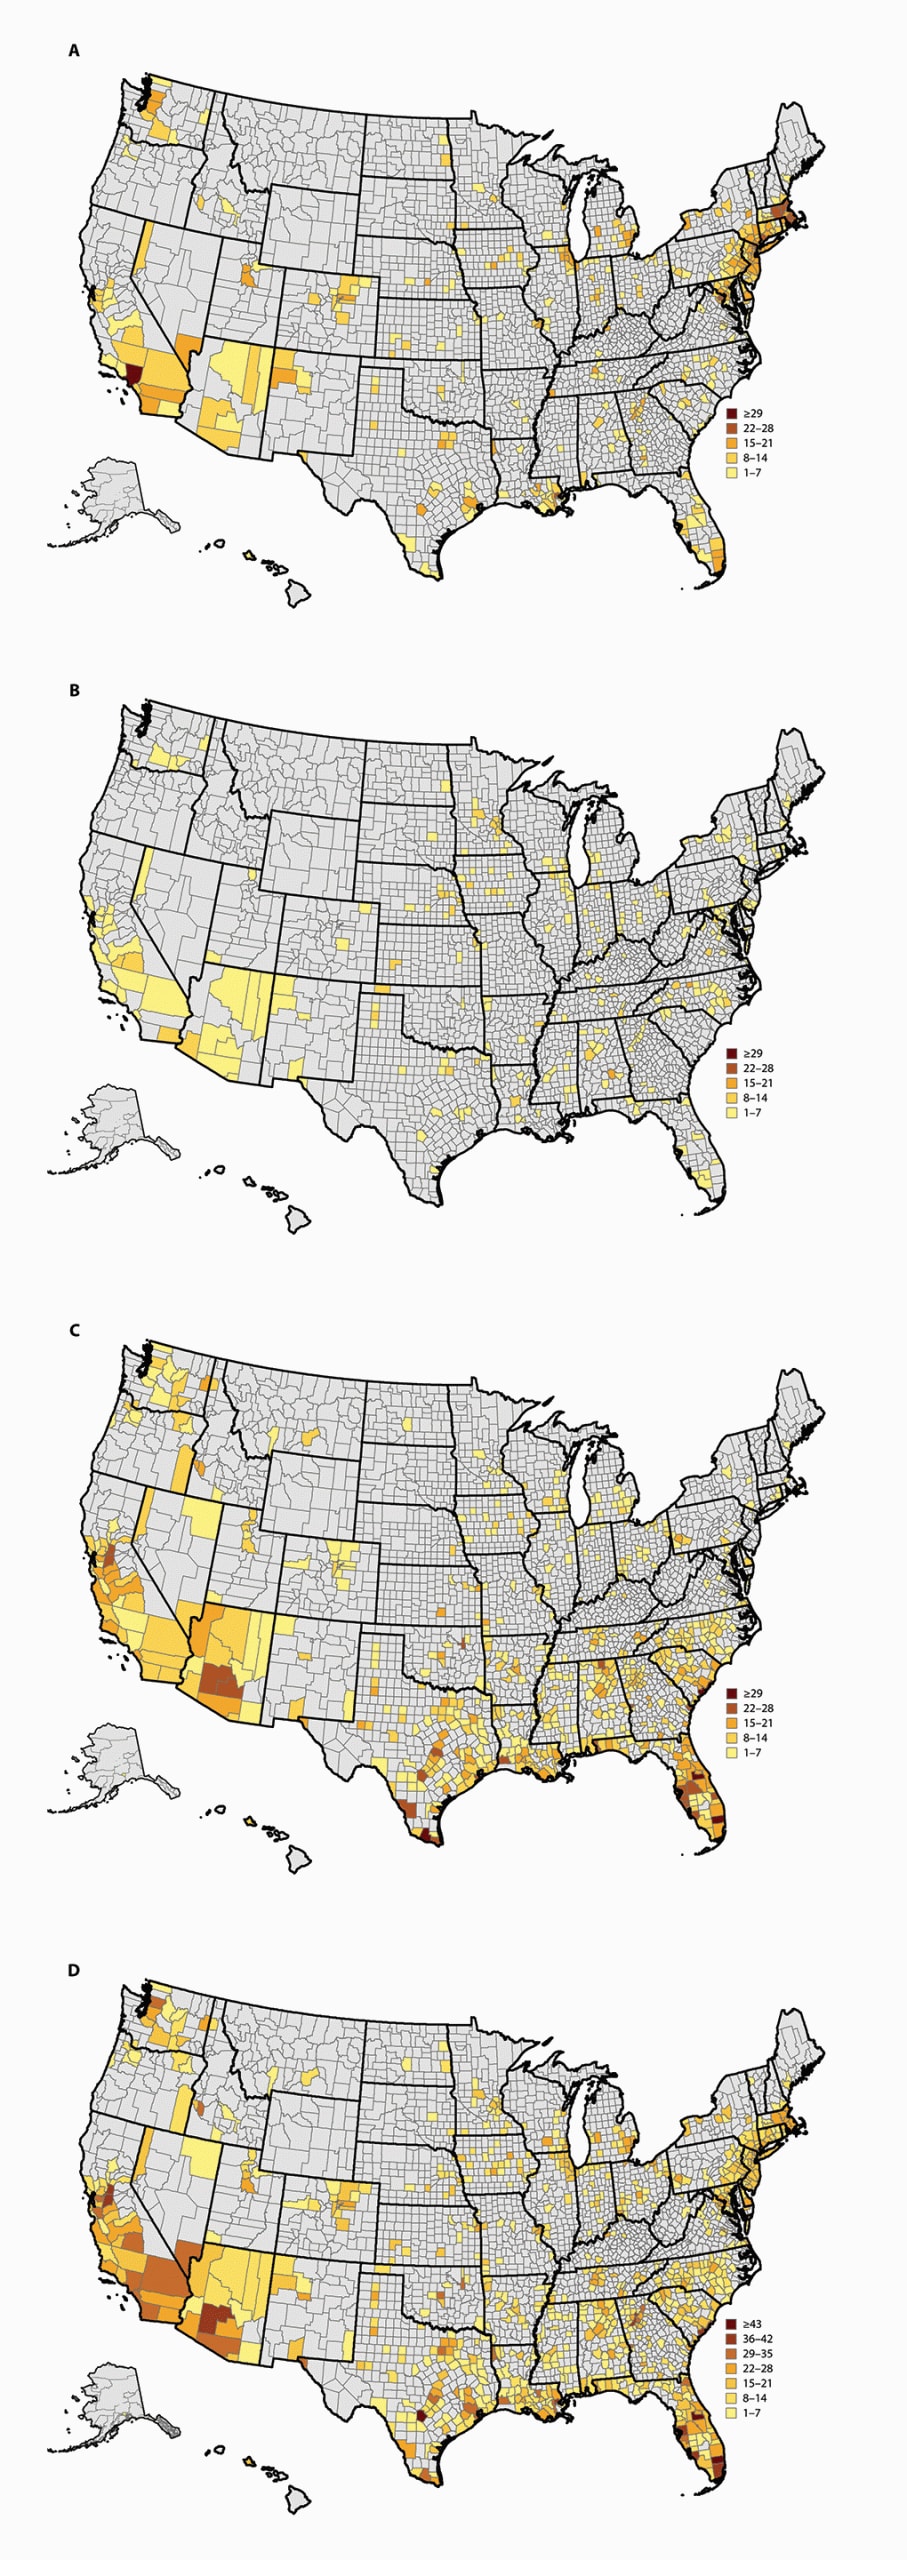 The figure is a series of four maps showing the number of COVID-19 hotspot alerts, by county and number of days meeting hotspot criteria for (A) March 8–April 30, (B) May 1–31, (C) June 1–July 15, and (D) entire period, in the United States, during March 8–July 15, 2020.